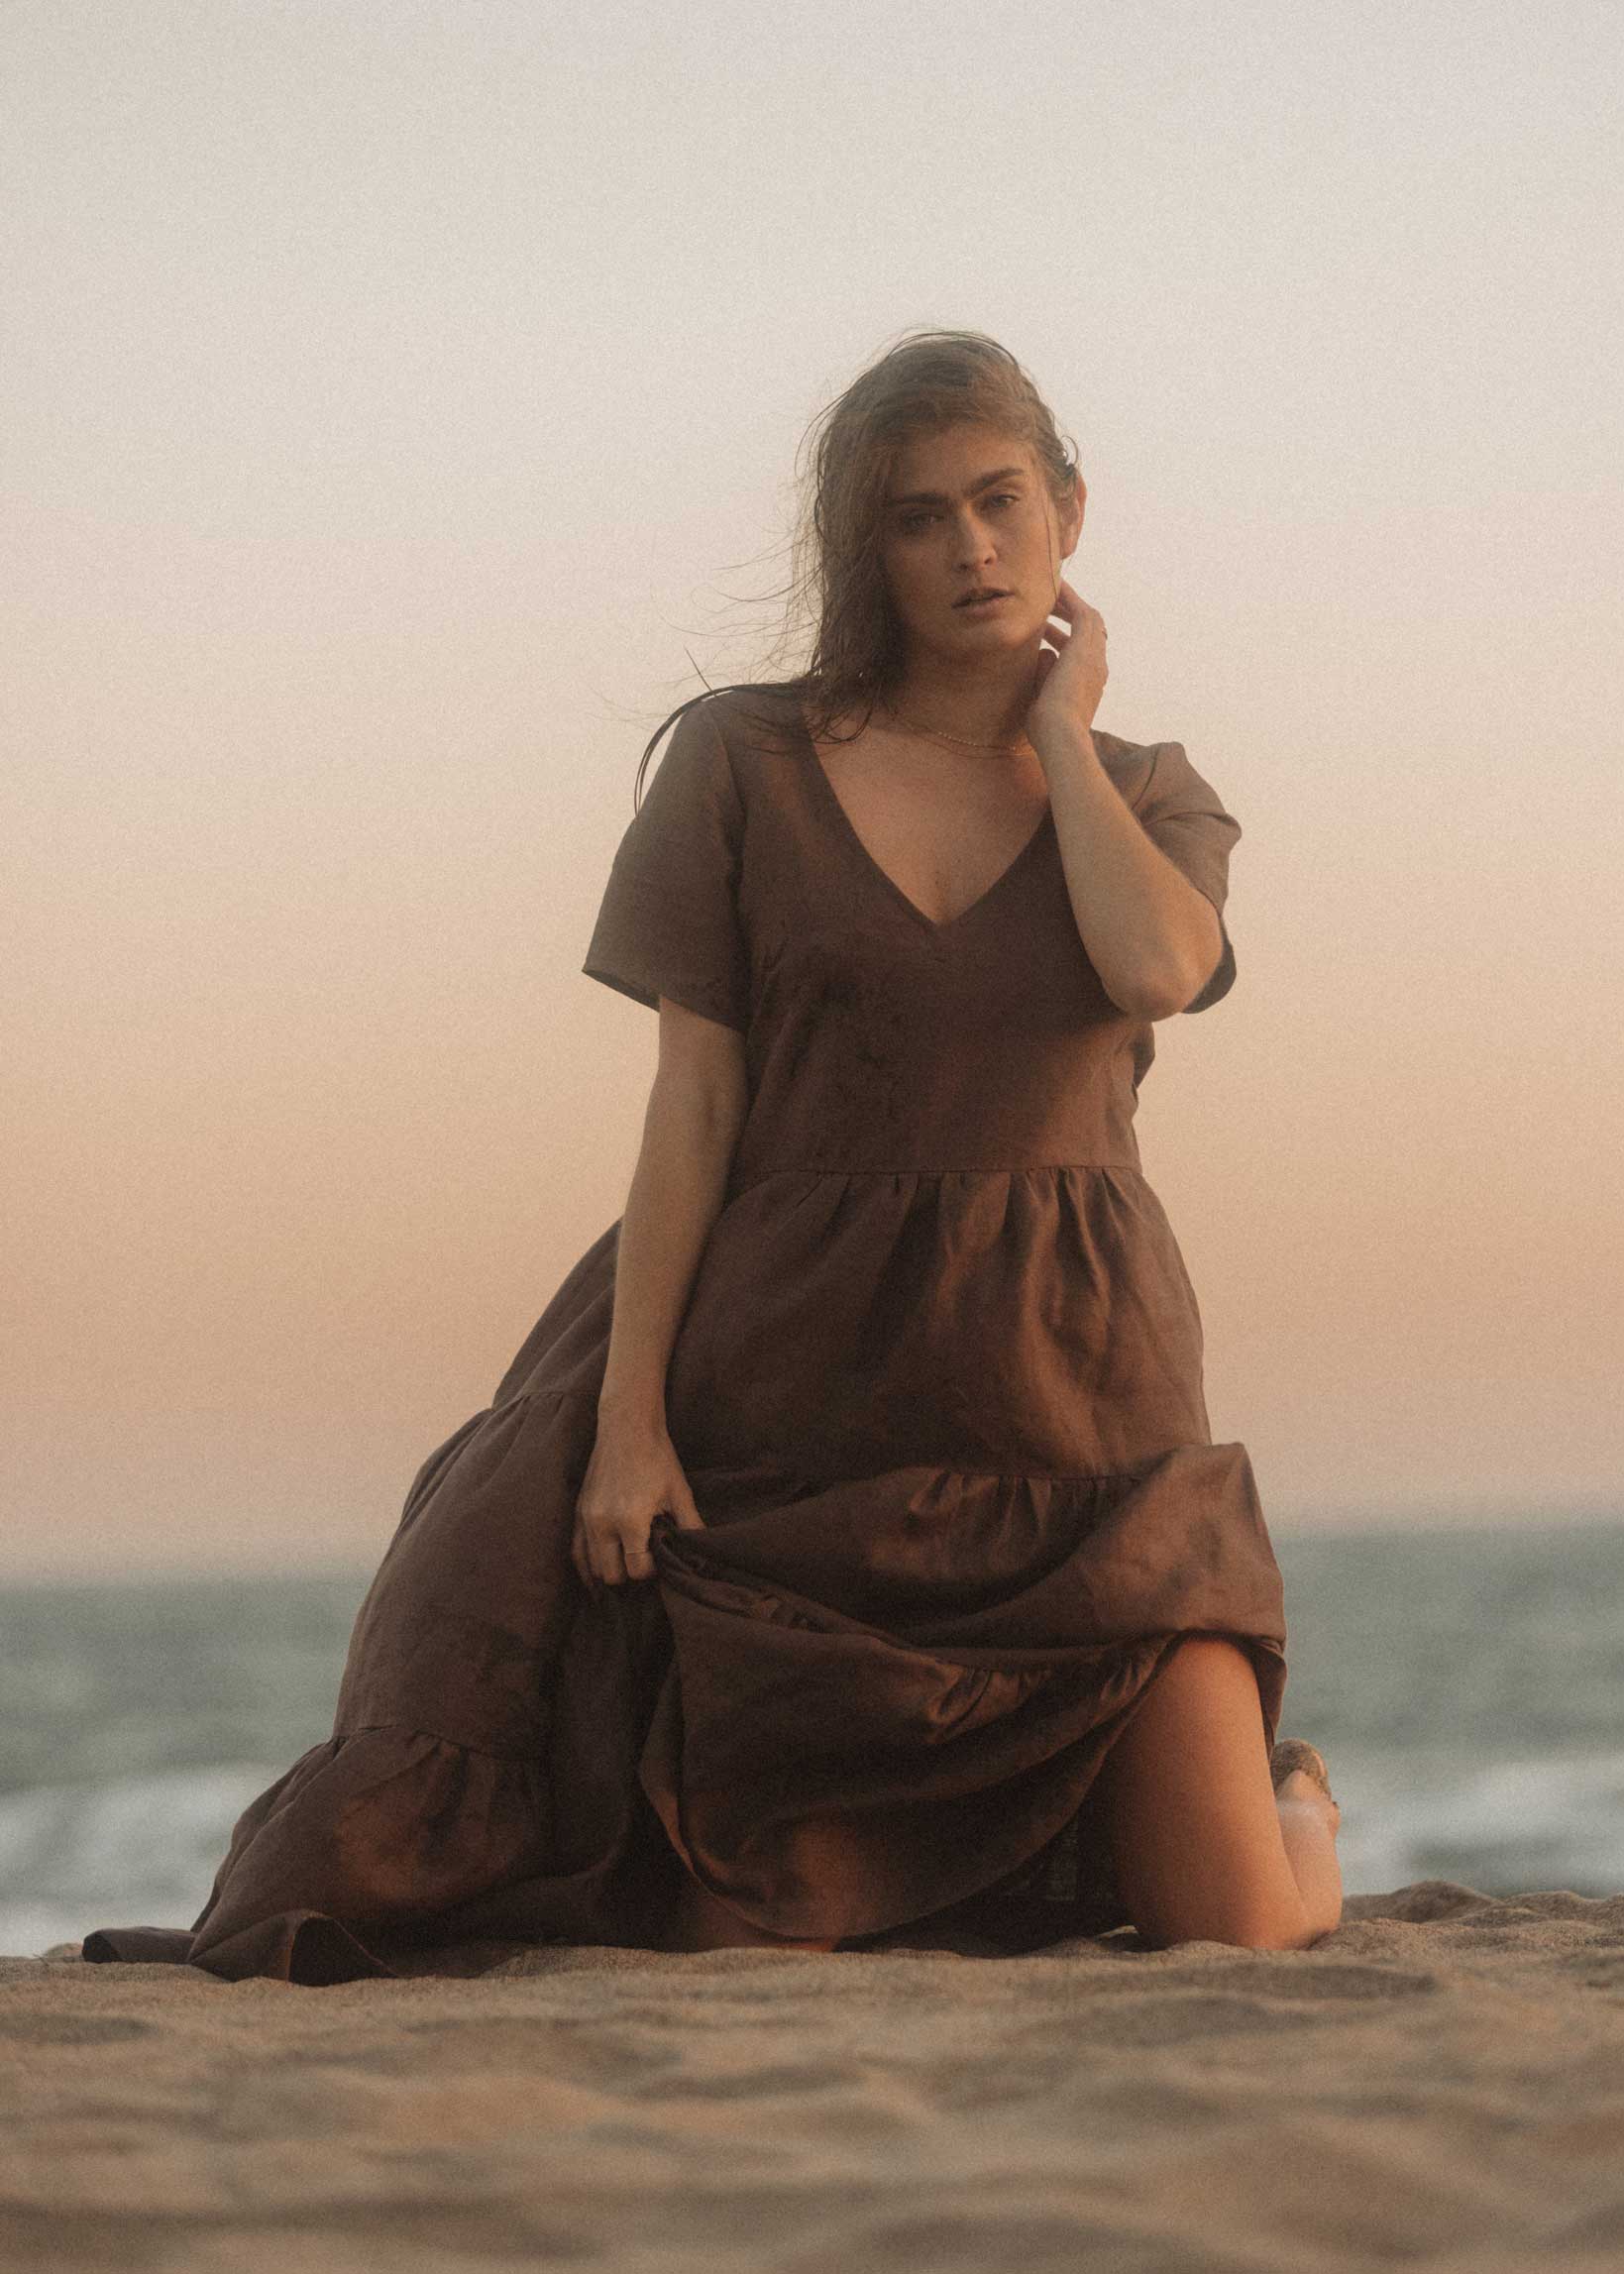 The Elwood Maxi dress in Mocha on the beach in Australia during golden hour. Our model shows off the beautiful tiers and volume of the dress with a big smile on her face.